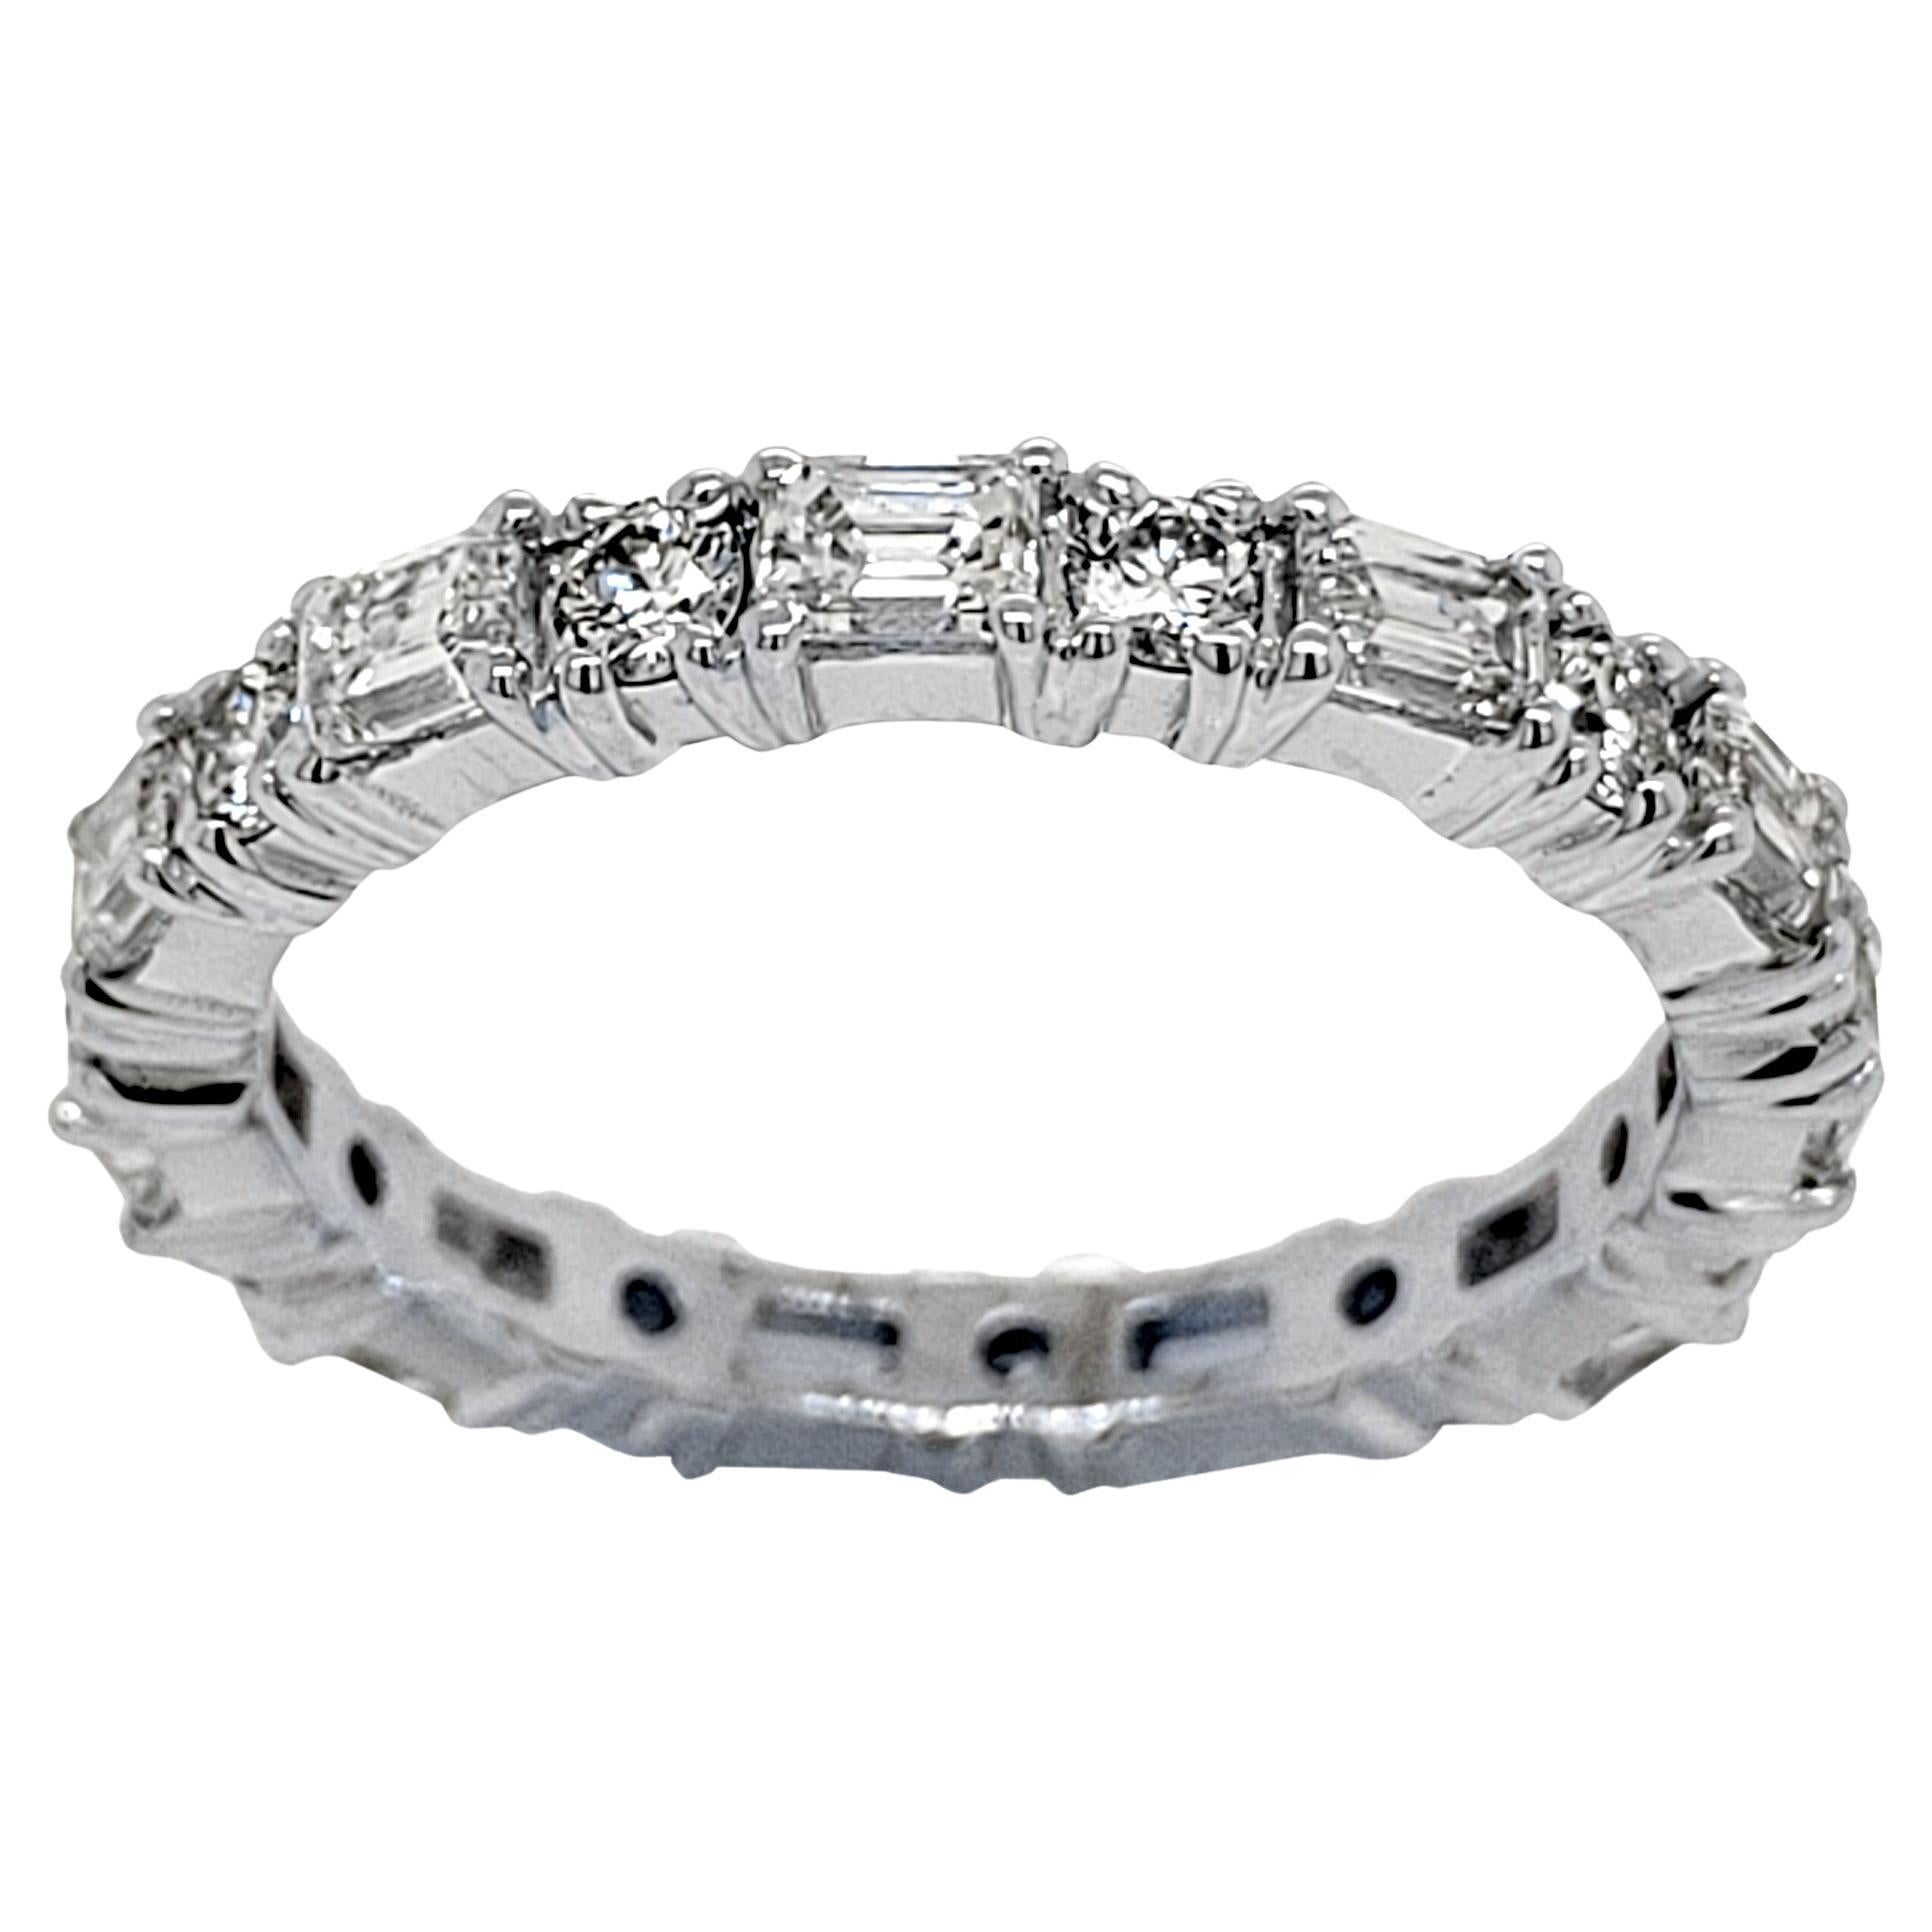 This beautiful Eternity Ring is made in 18K White Gold showcasing 11 perfectly matched VS/E-F Emerald Cut and 11 Round Brilliant Diamonds Set in Shared Prong Mode.
Total Weight of diamonds: 1.71 Ct Clarity: VS, Color: E-F
Total Weight of the Ring: